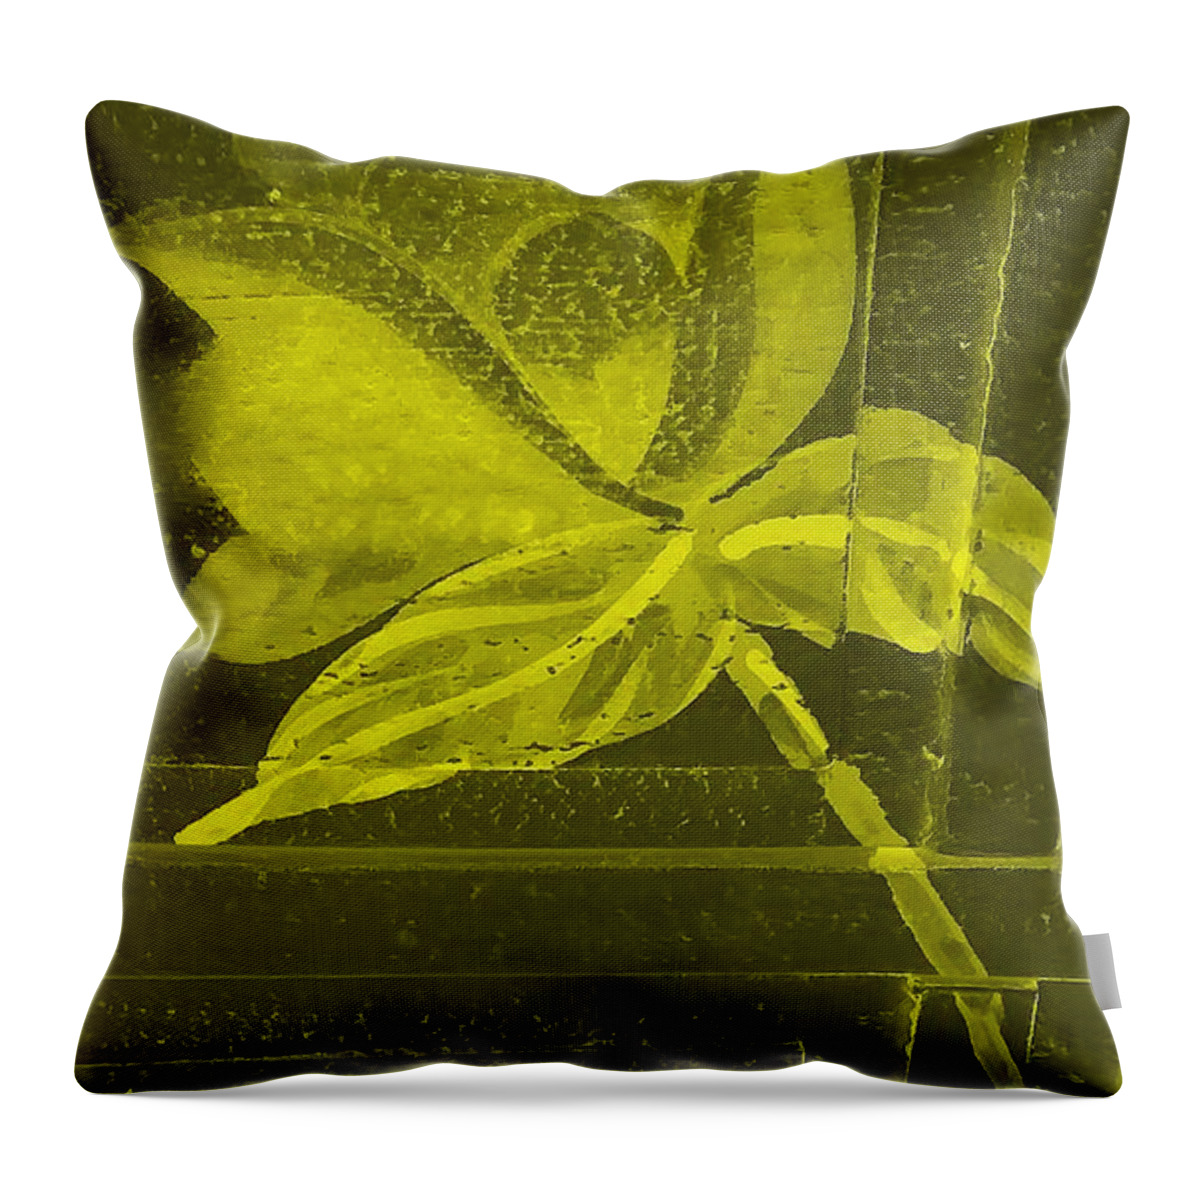 Flowers Throw Pillow featuring the photograph Yellow Negative Wood Flower by Rob Hans